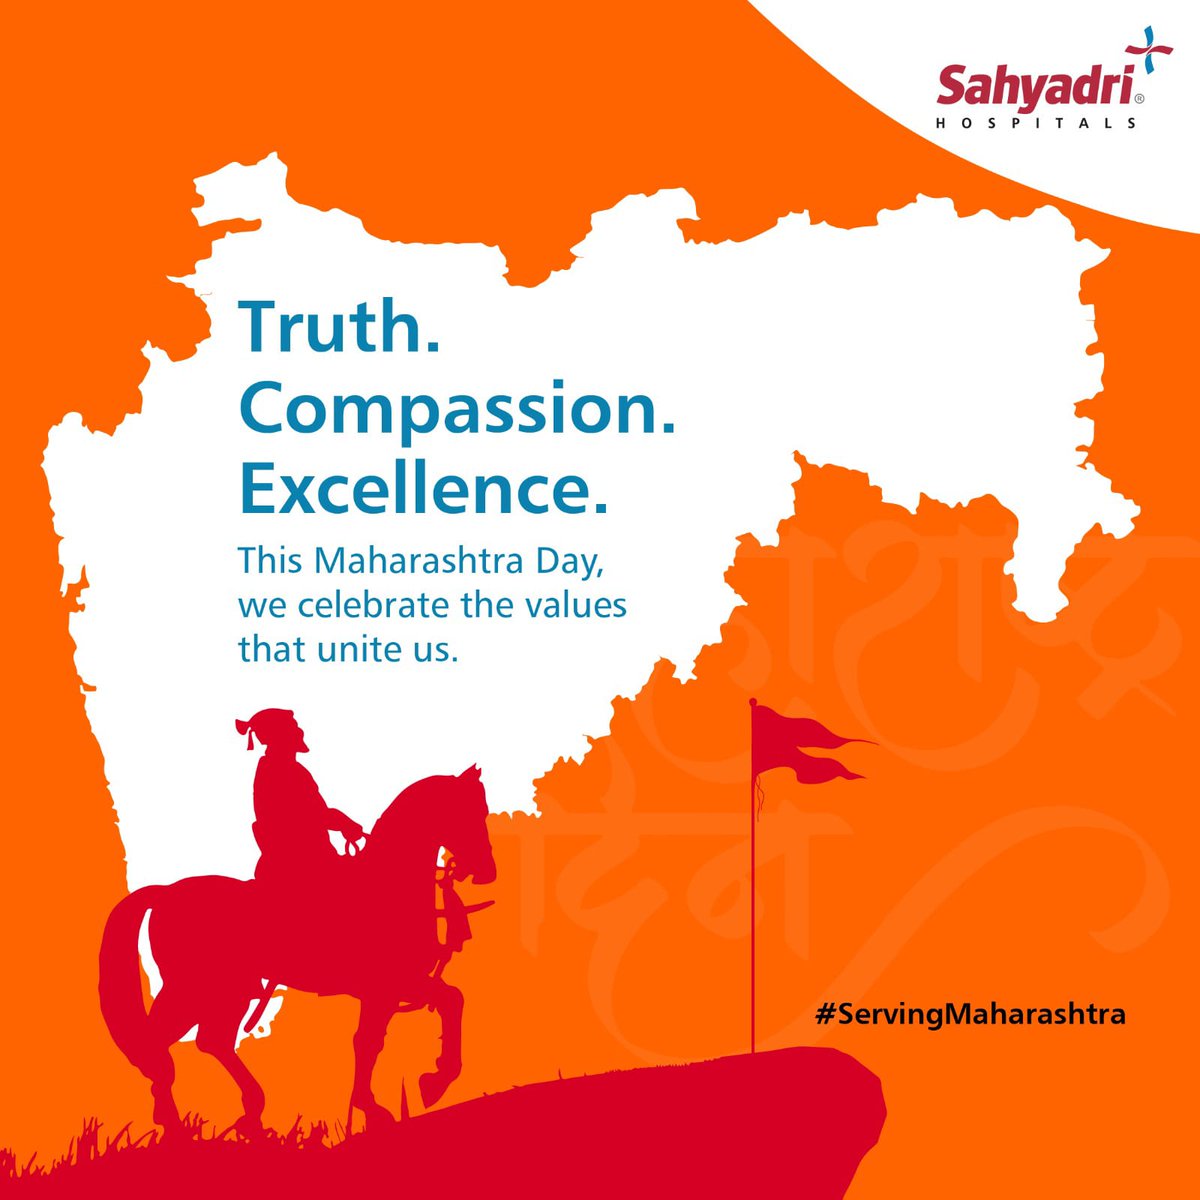 We celebrate the spirit of this great state by providing high-quality healthcare to its people and building a healthier future, one patient at a time.

#SahyadriHospitals #MaharashtraDay #ServingMaharashtra #CommittedToCare